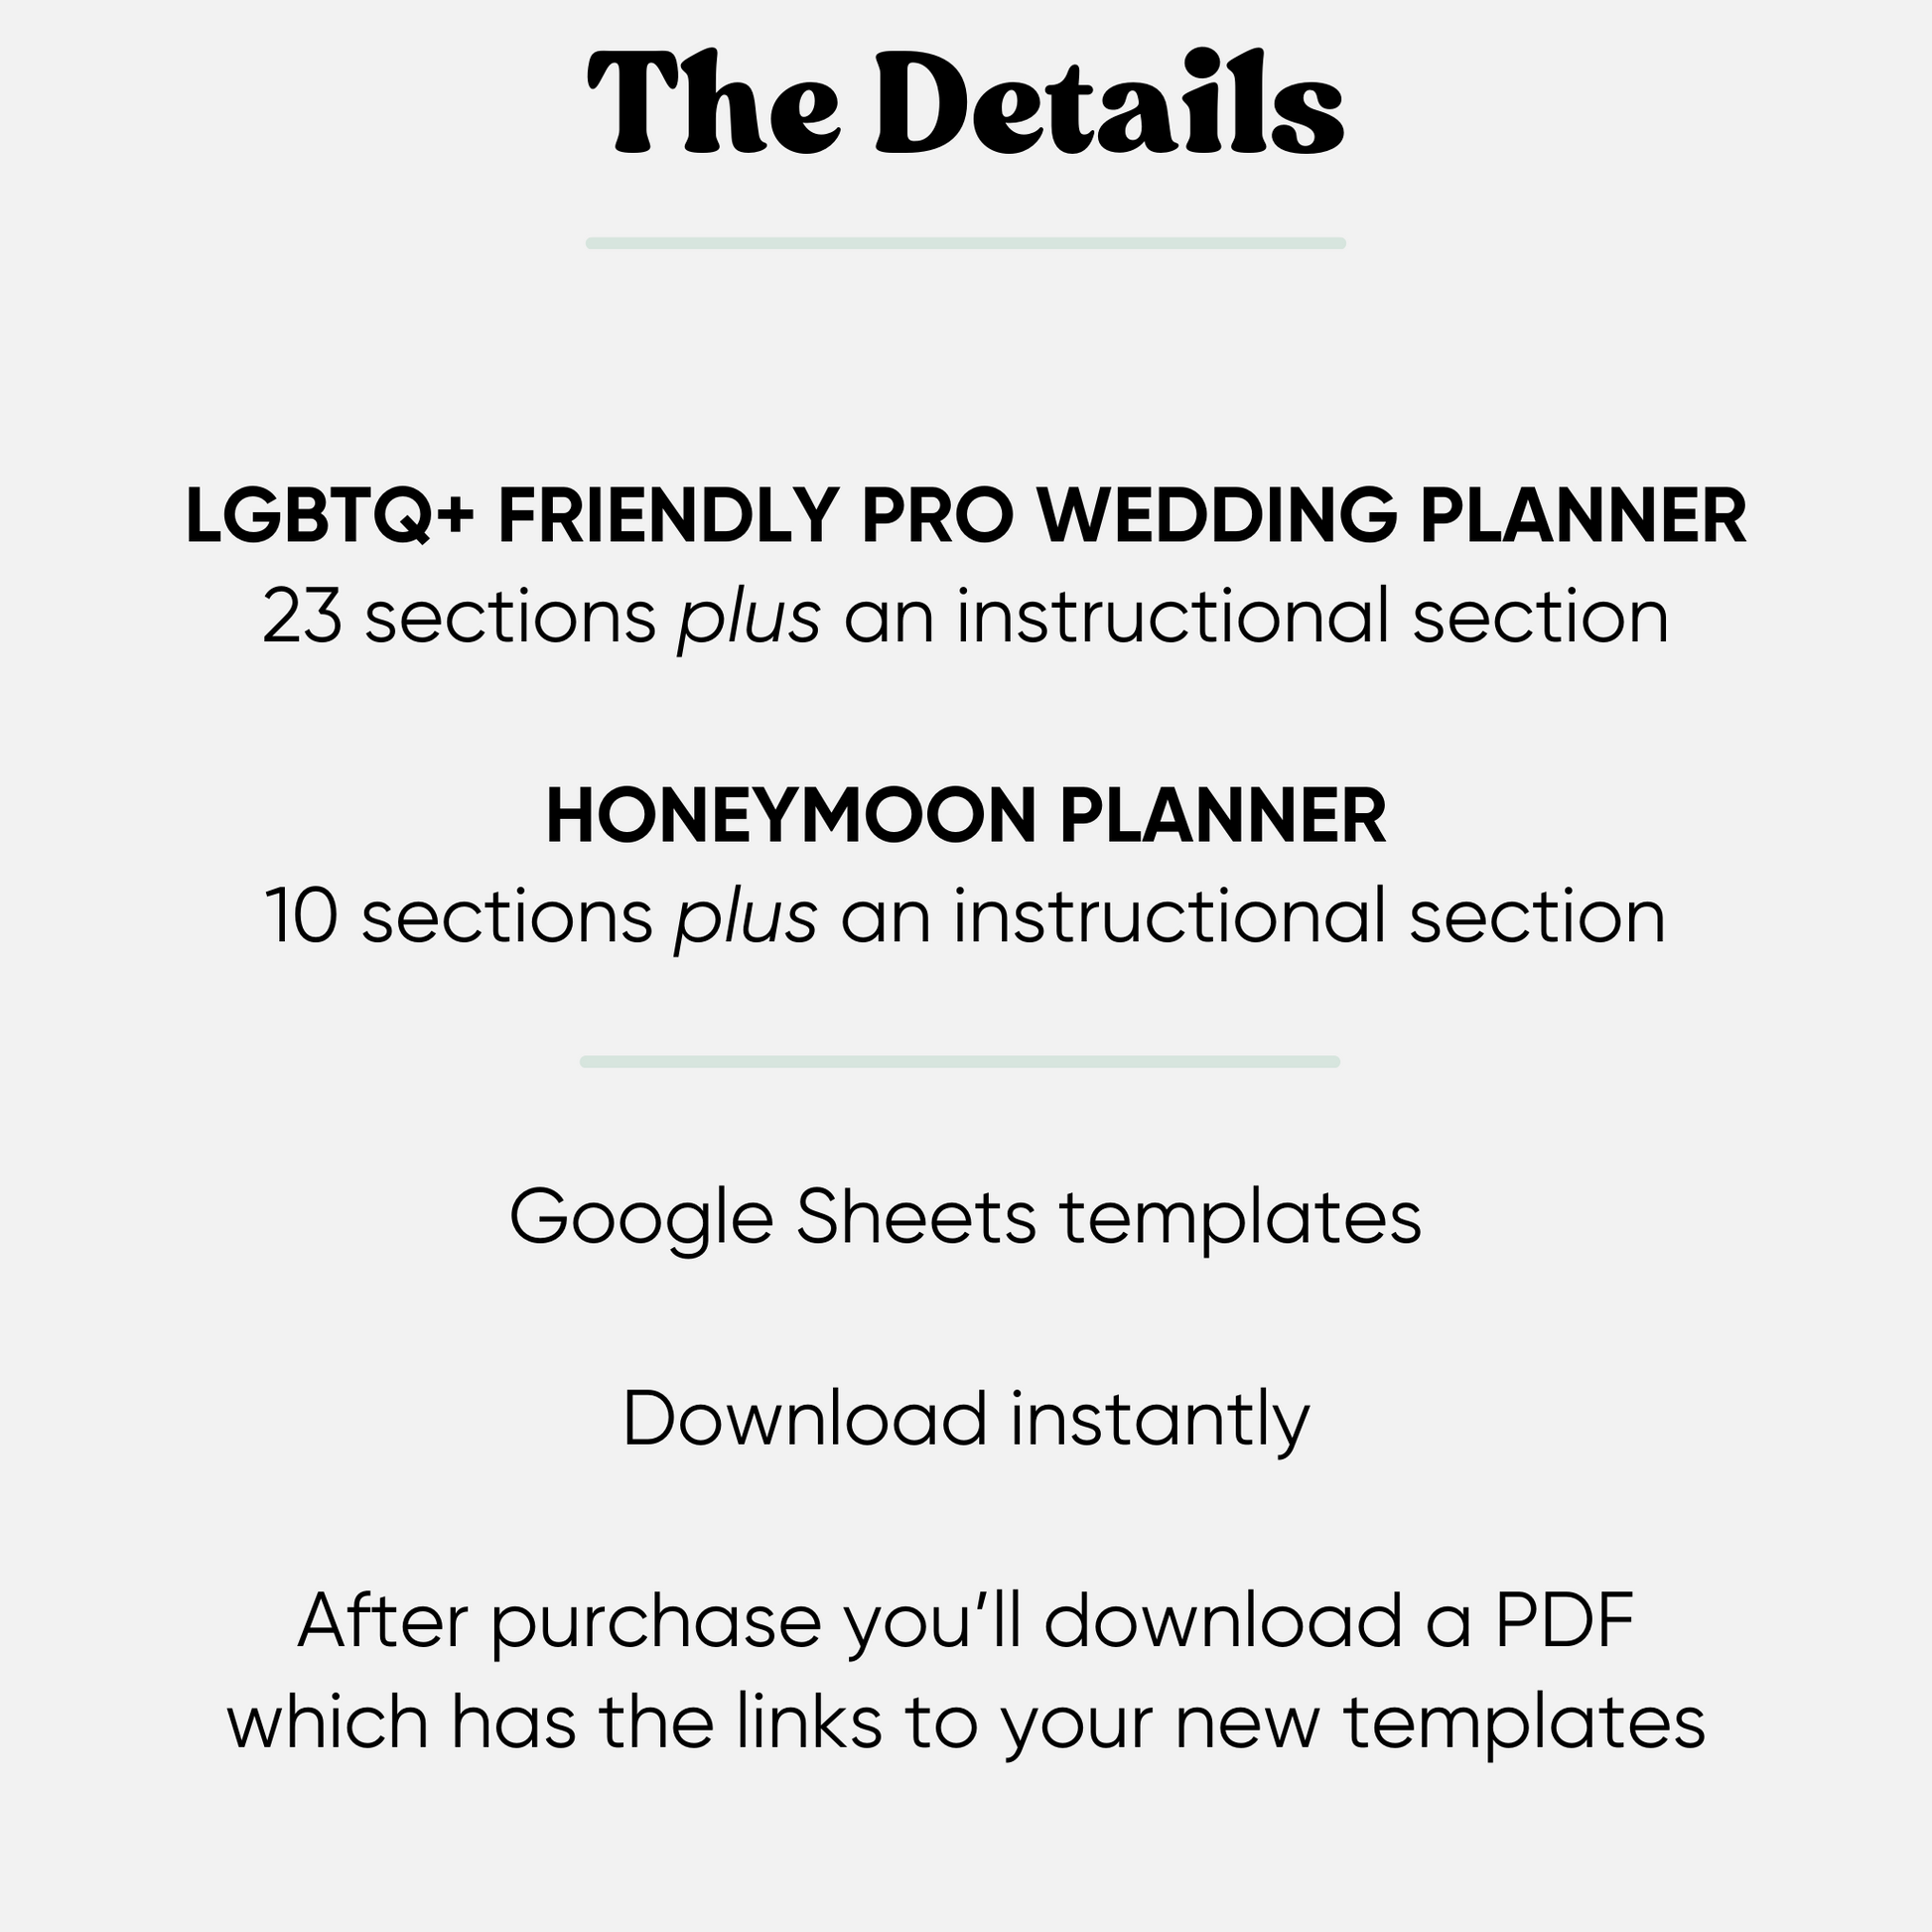 Screenshot of the LGBTQ+ friendly digital wedding planner template in Google Sheets. The template is thoughtfully organized with dedicated sections for various wedding planning details, ensuring a seamless and inclusive planning experience.